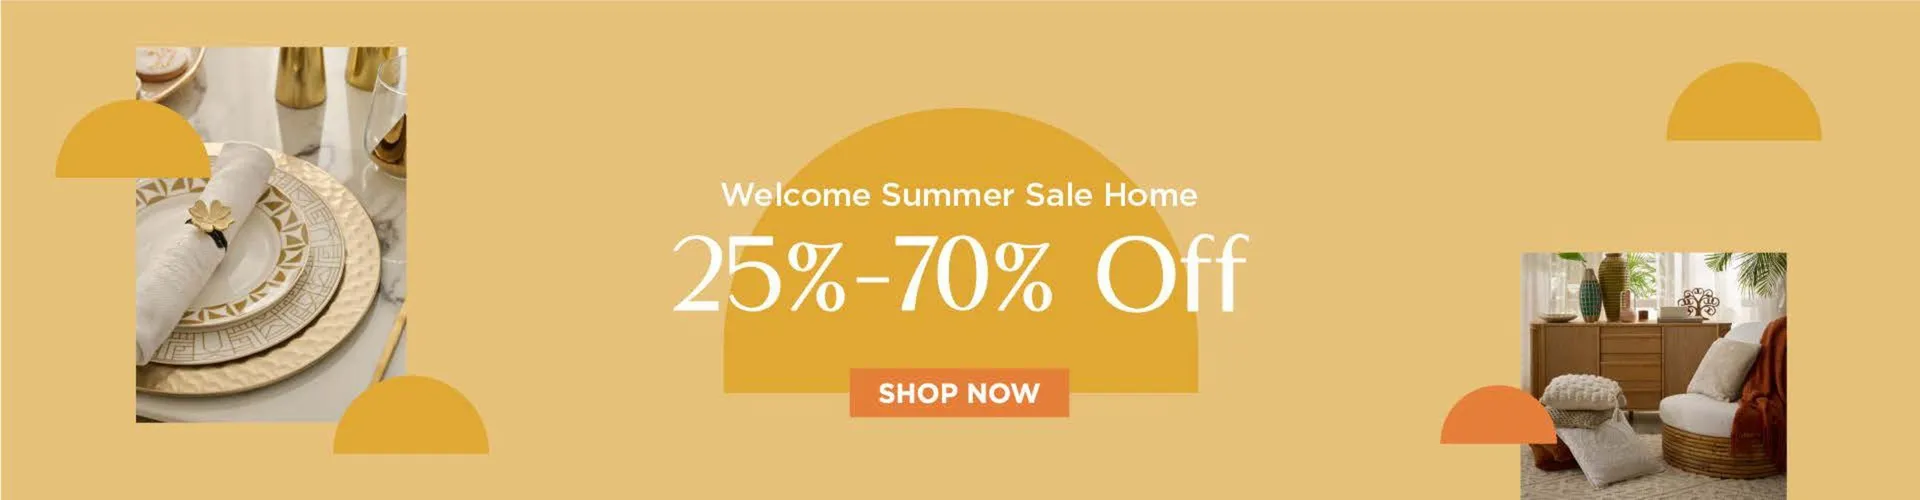 Summer Sale Home! 25-70% Off - 1